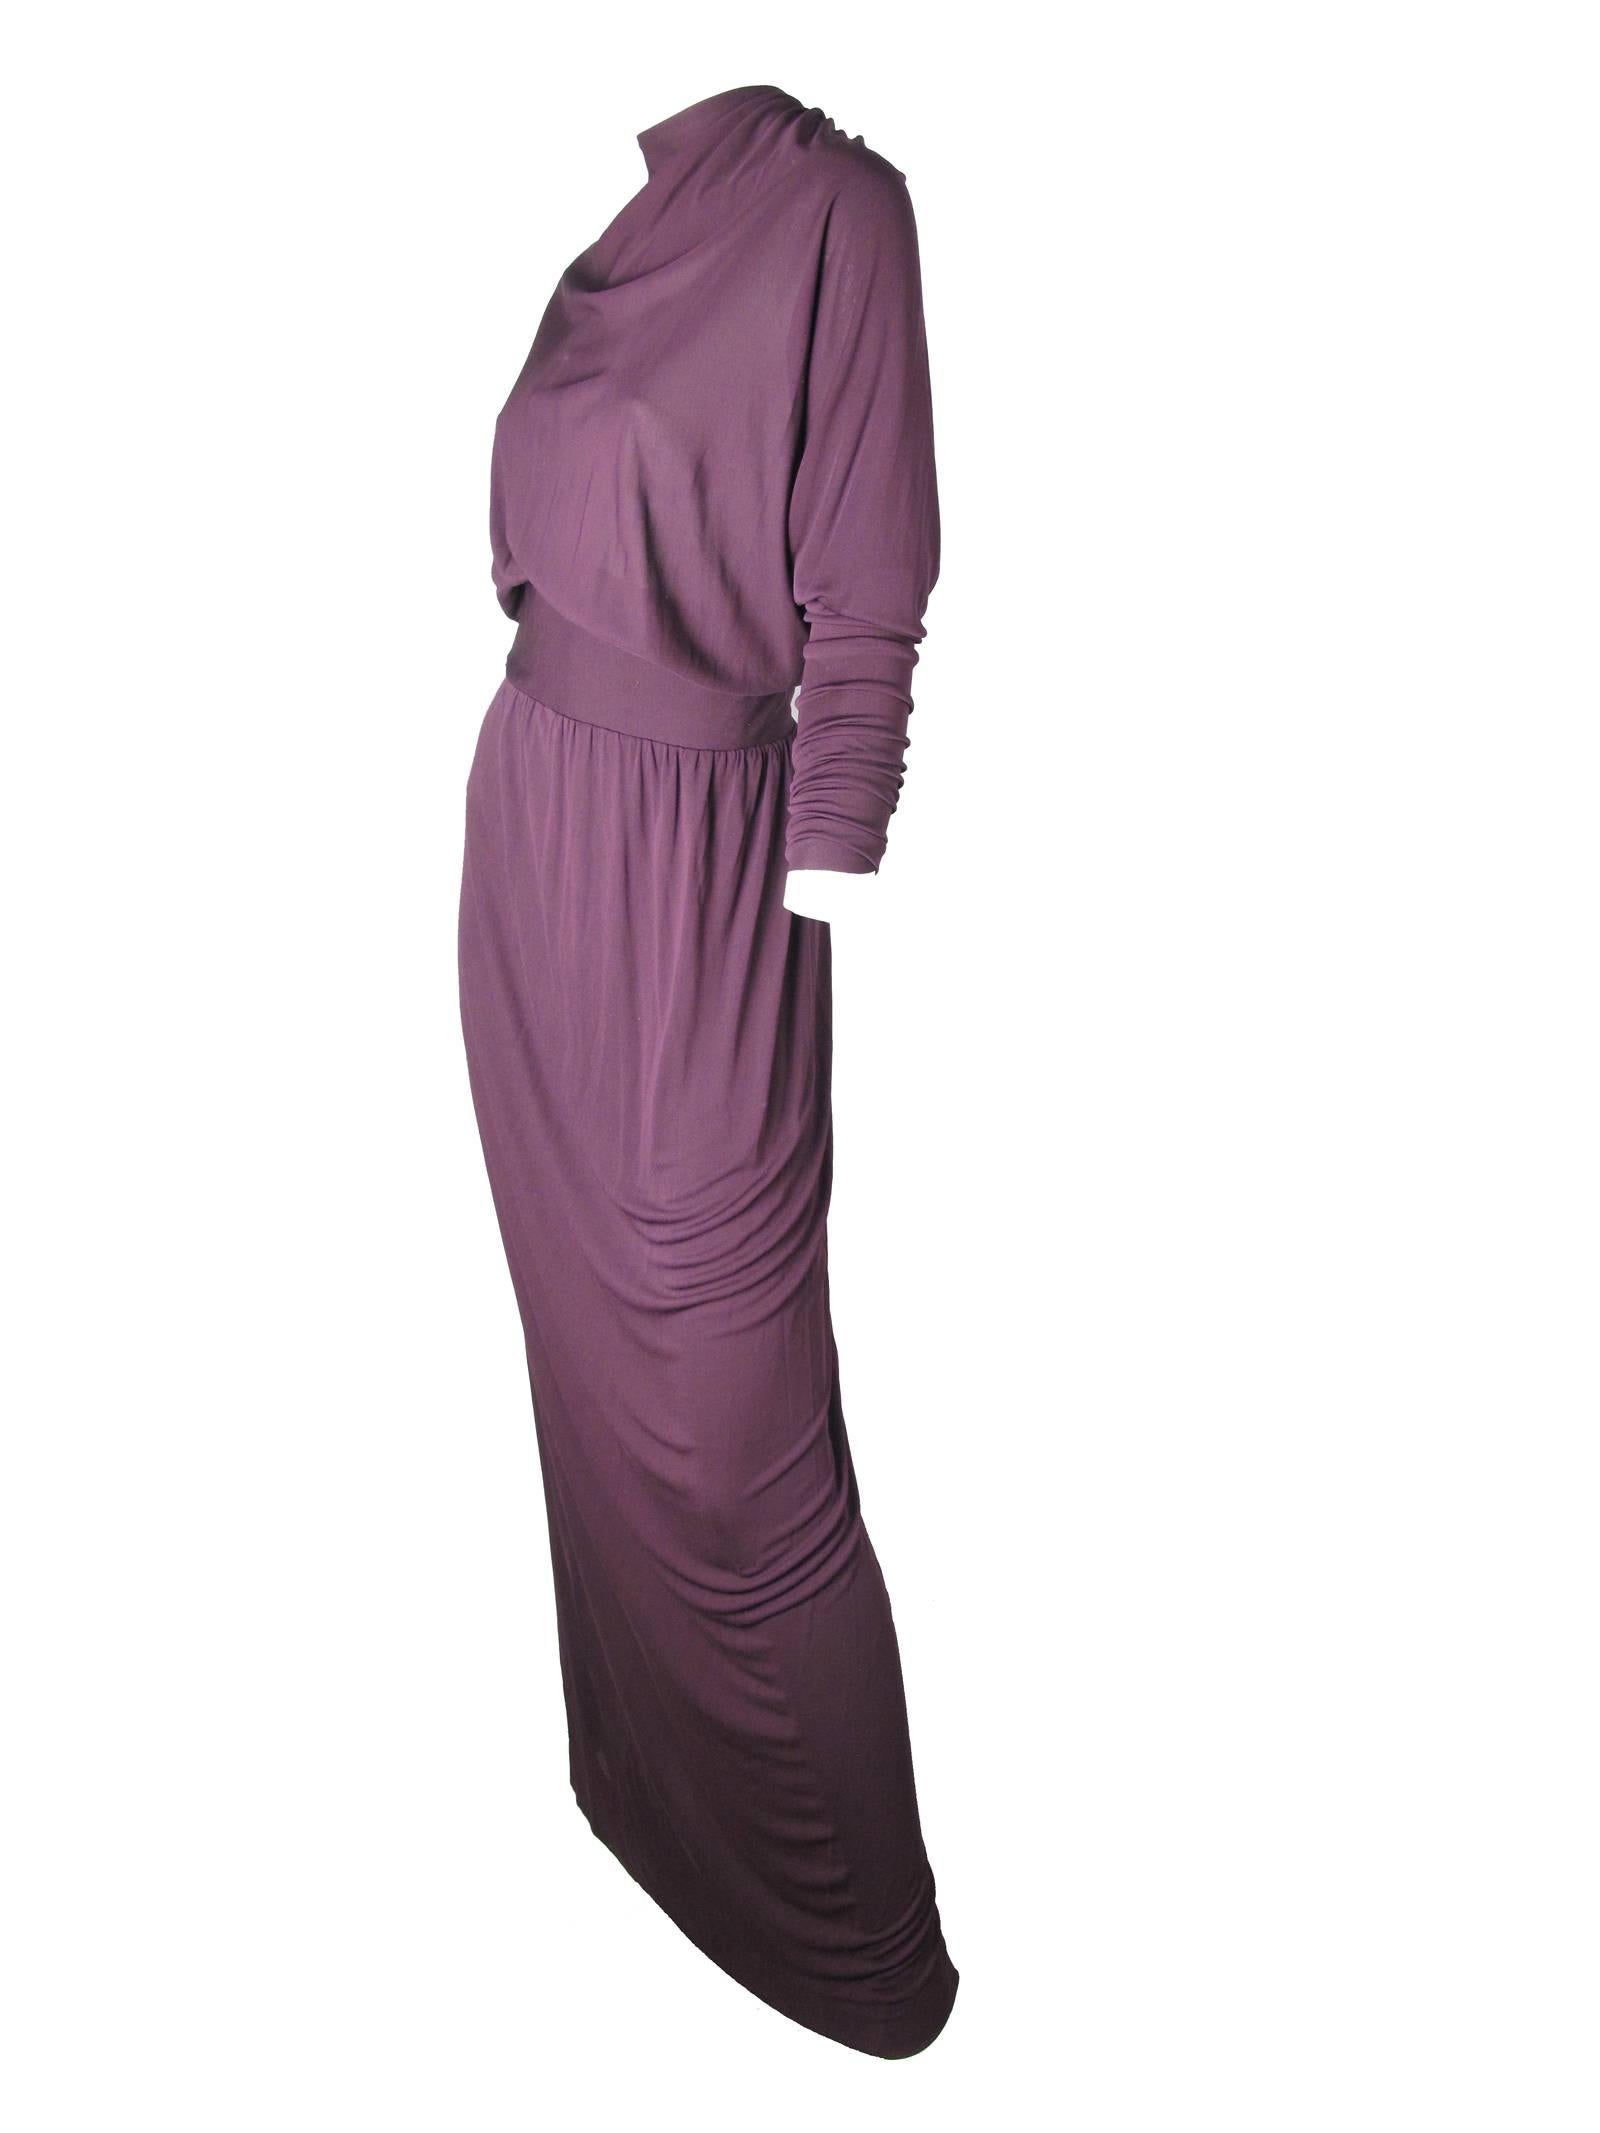 Gorgeous early 70s Givenchy deep purple viscose jersey evening gown with ruching at cuffs and down back.  Condition:  AS IS, some moth holes on front by neck and on some stitching is showing on back by zipper, see photo.  Zipper up back.
Size 8 